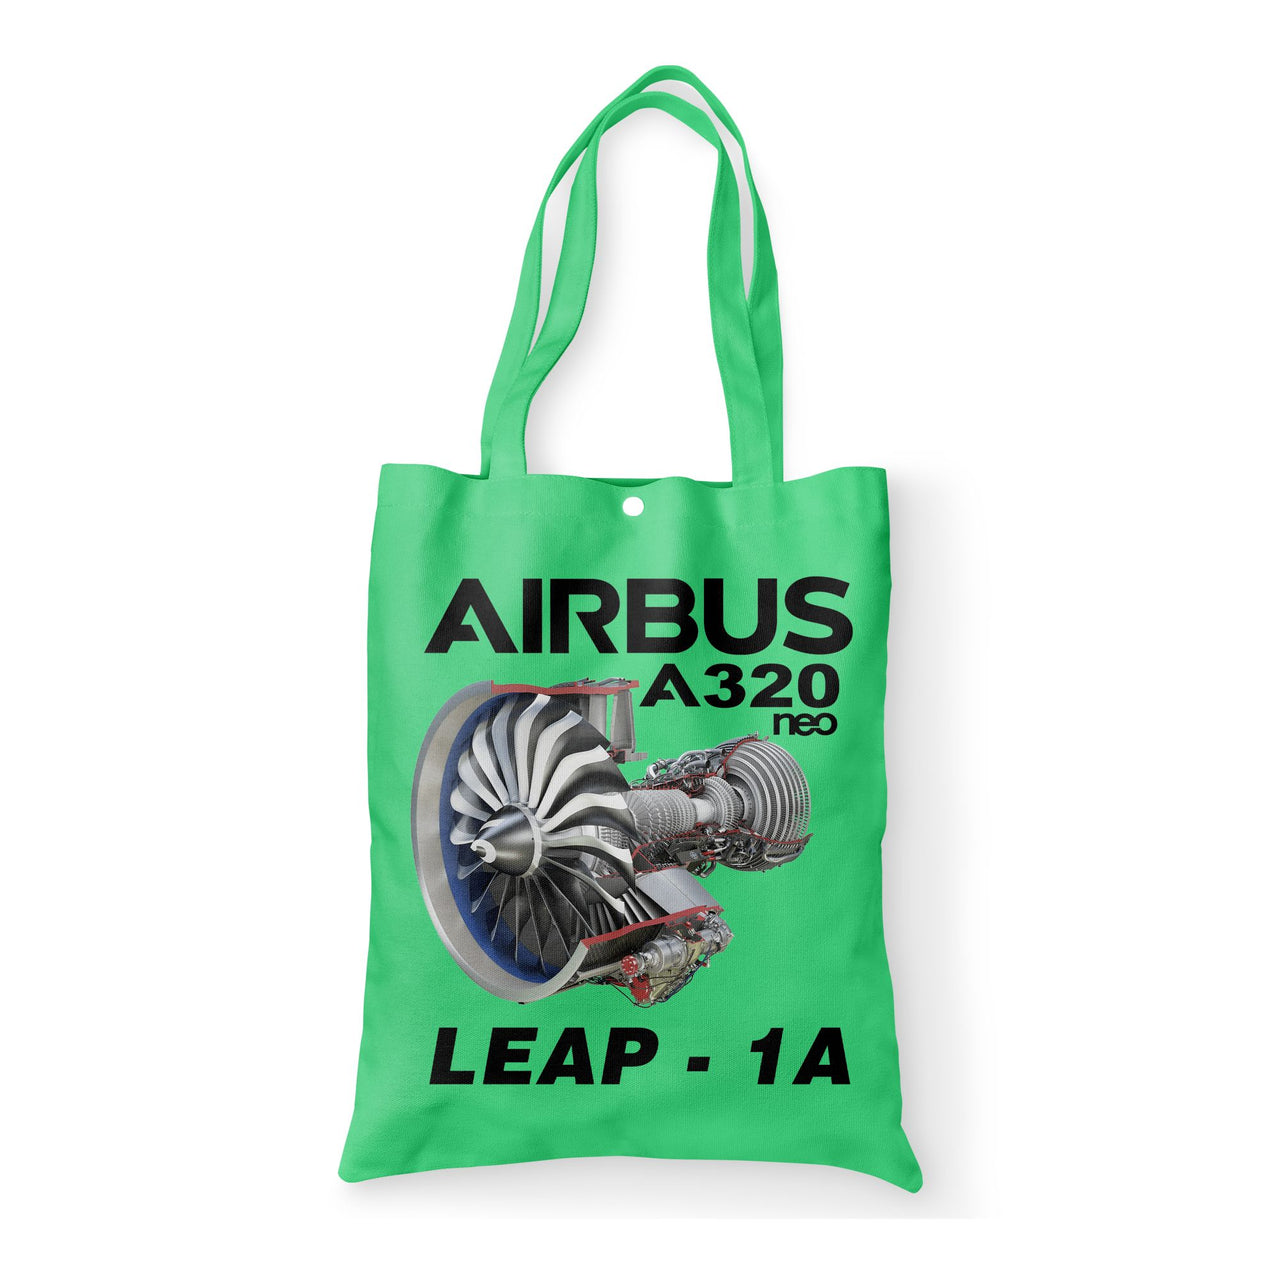 Airbus A320neo & Leap 1A Designed Tote Bags